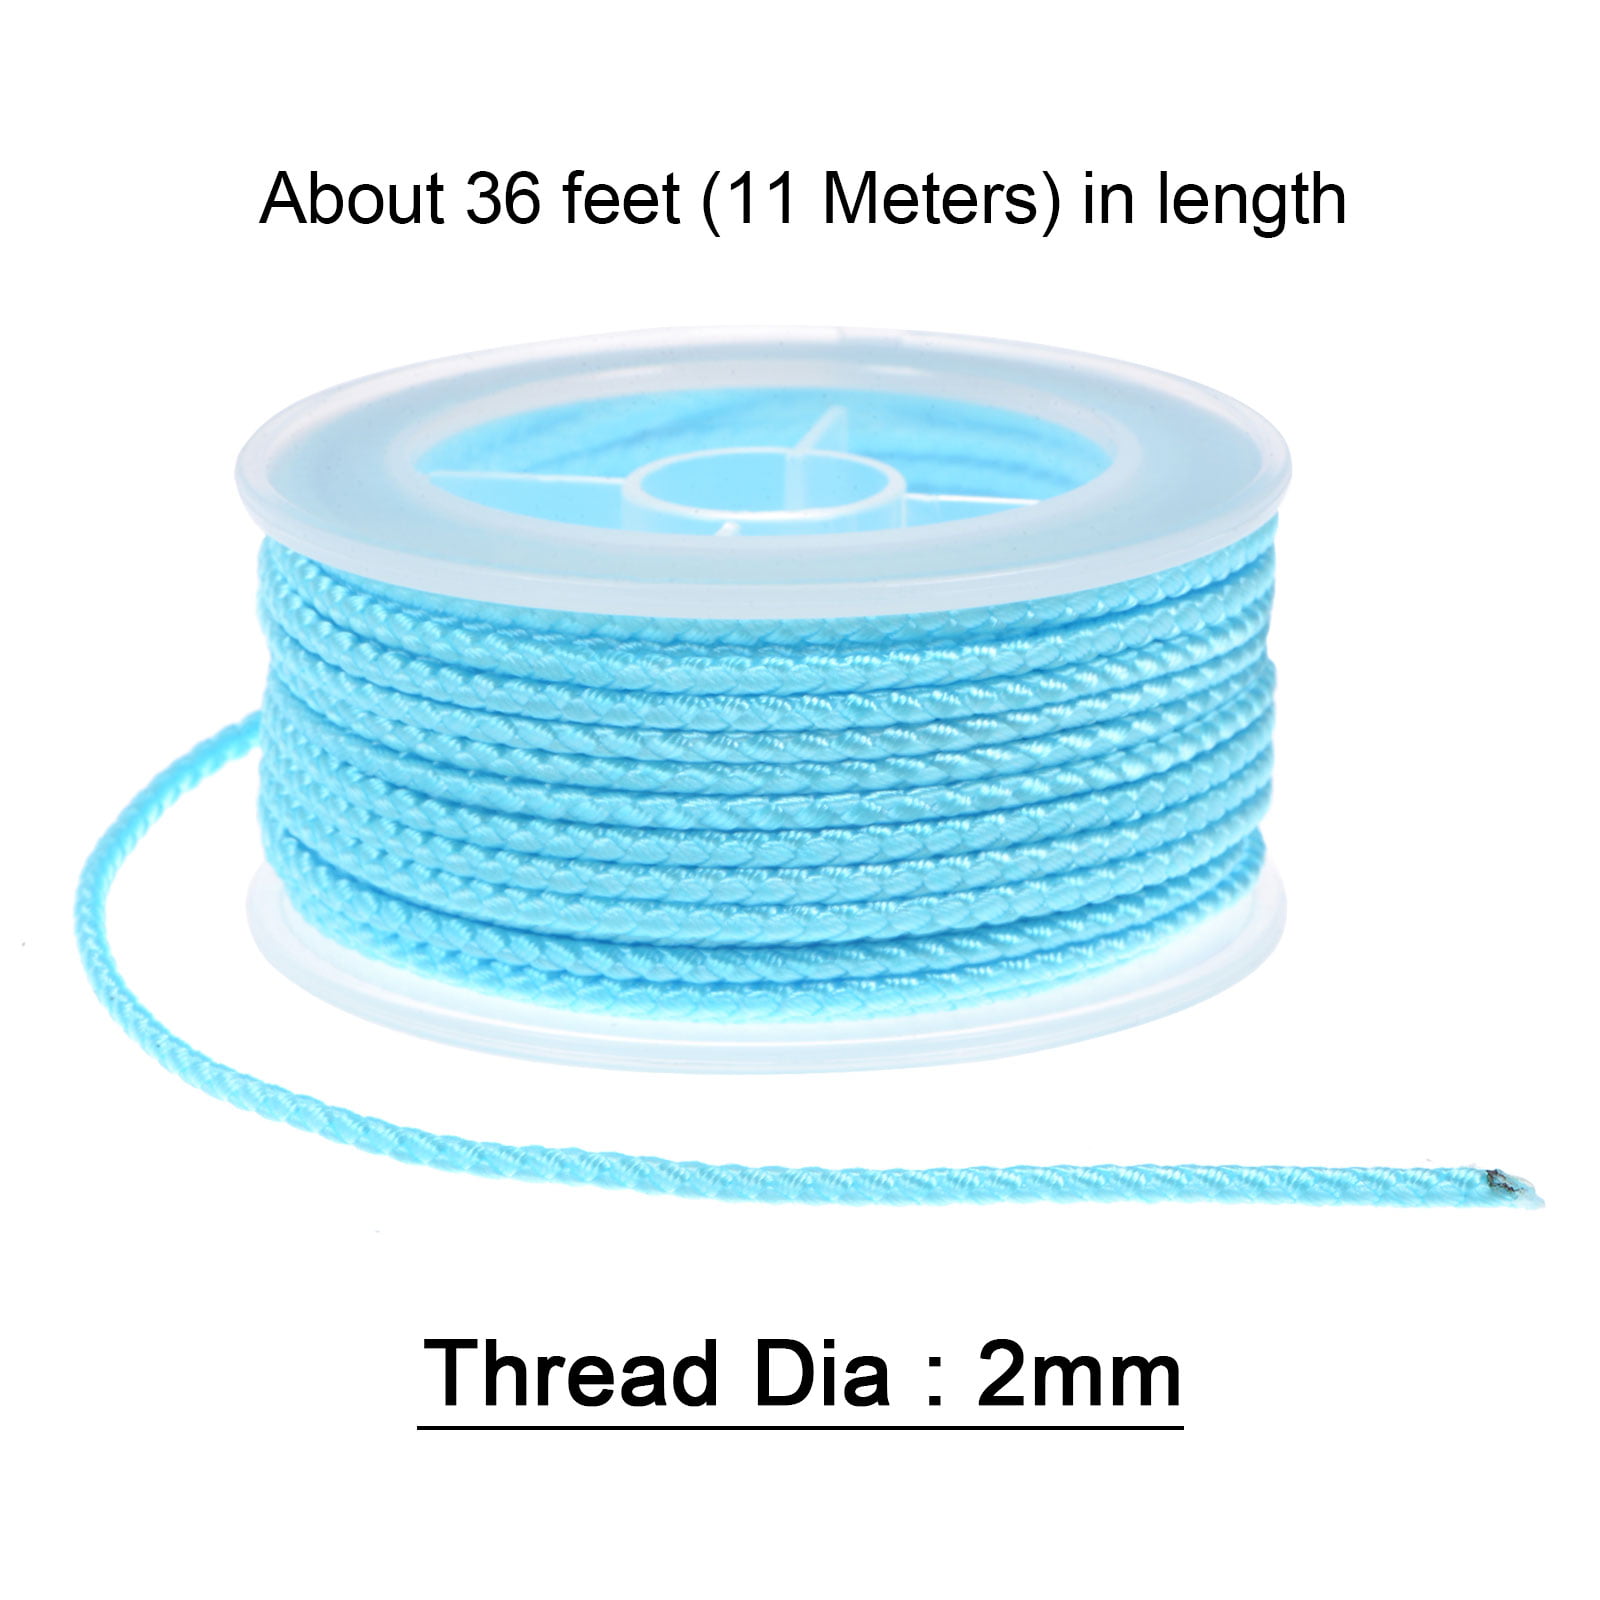 2 Packs Nylon Thread Twine Beading Cord 1.6mm Extra-Strong Braided Nylon Crafting String 16m/52 Feet, Teal Blue, Women's, Size: 1.6 mm